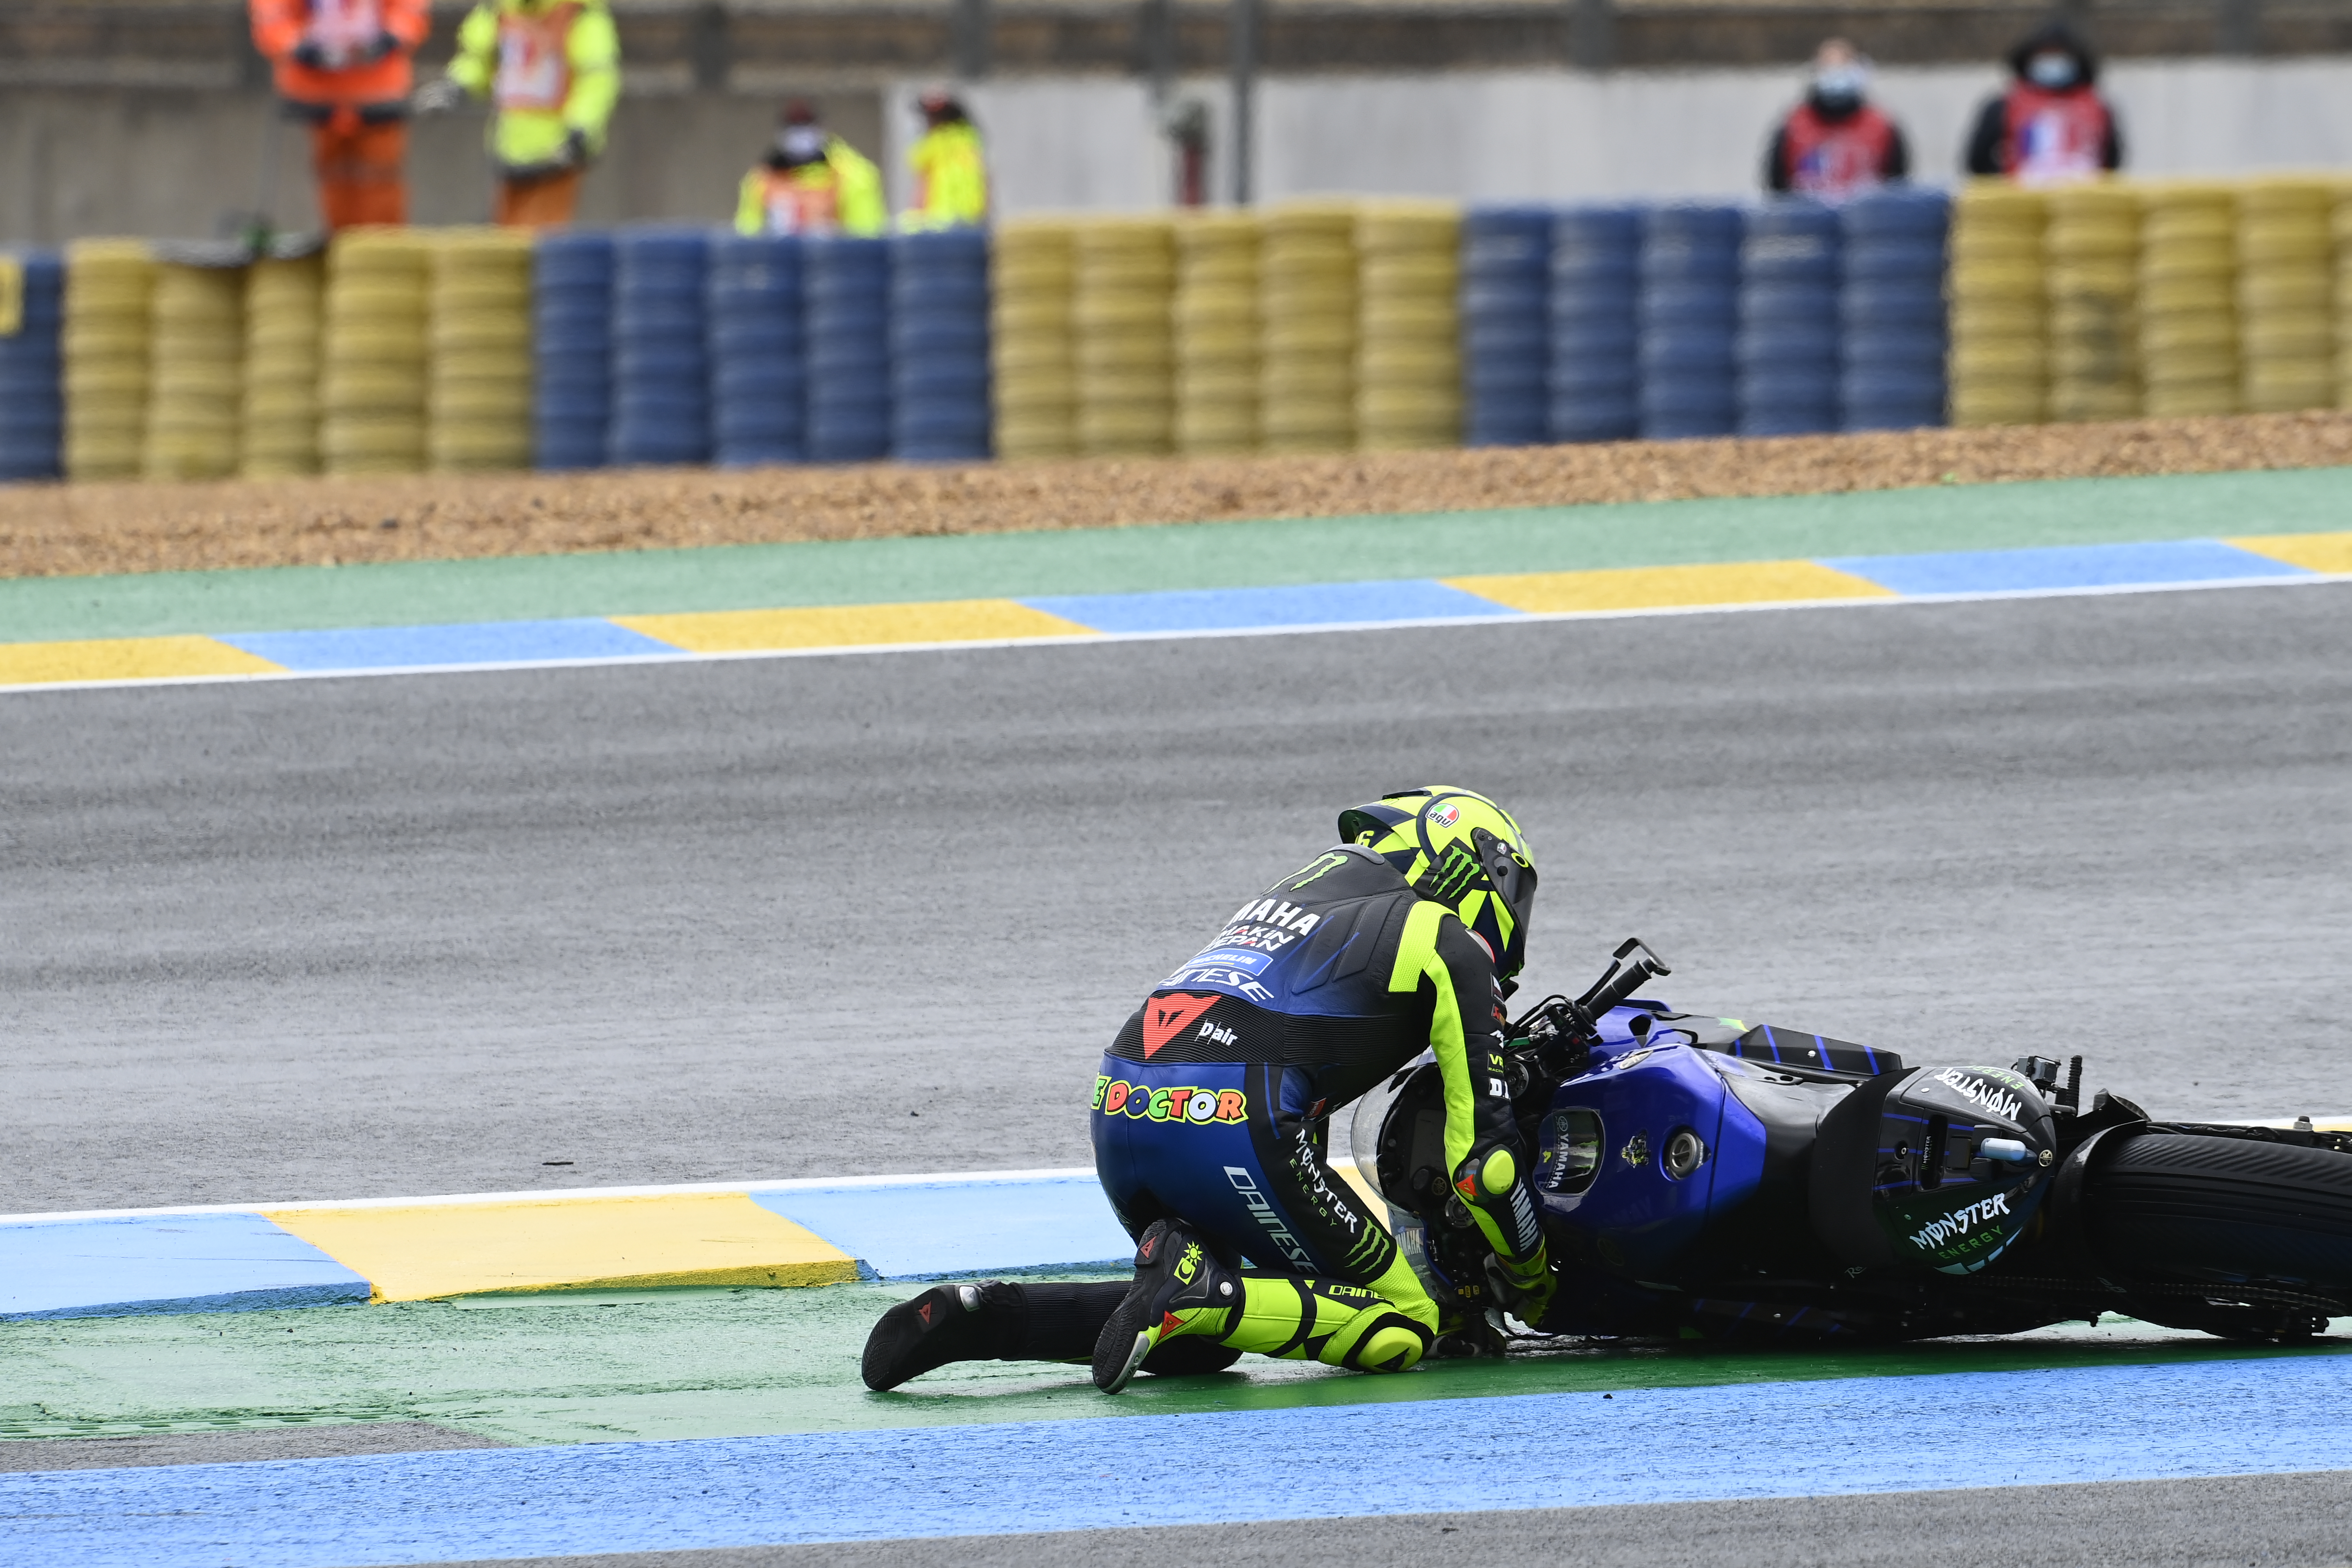 Why Rossi keep crashing? - The Race